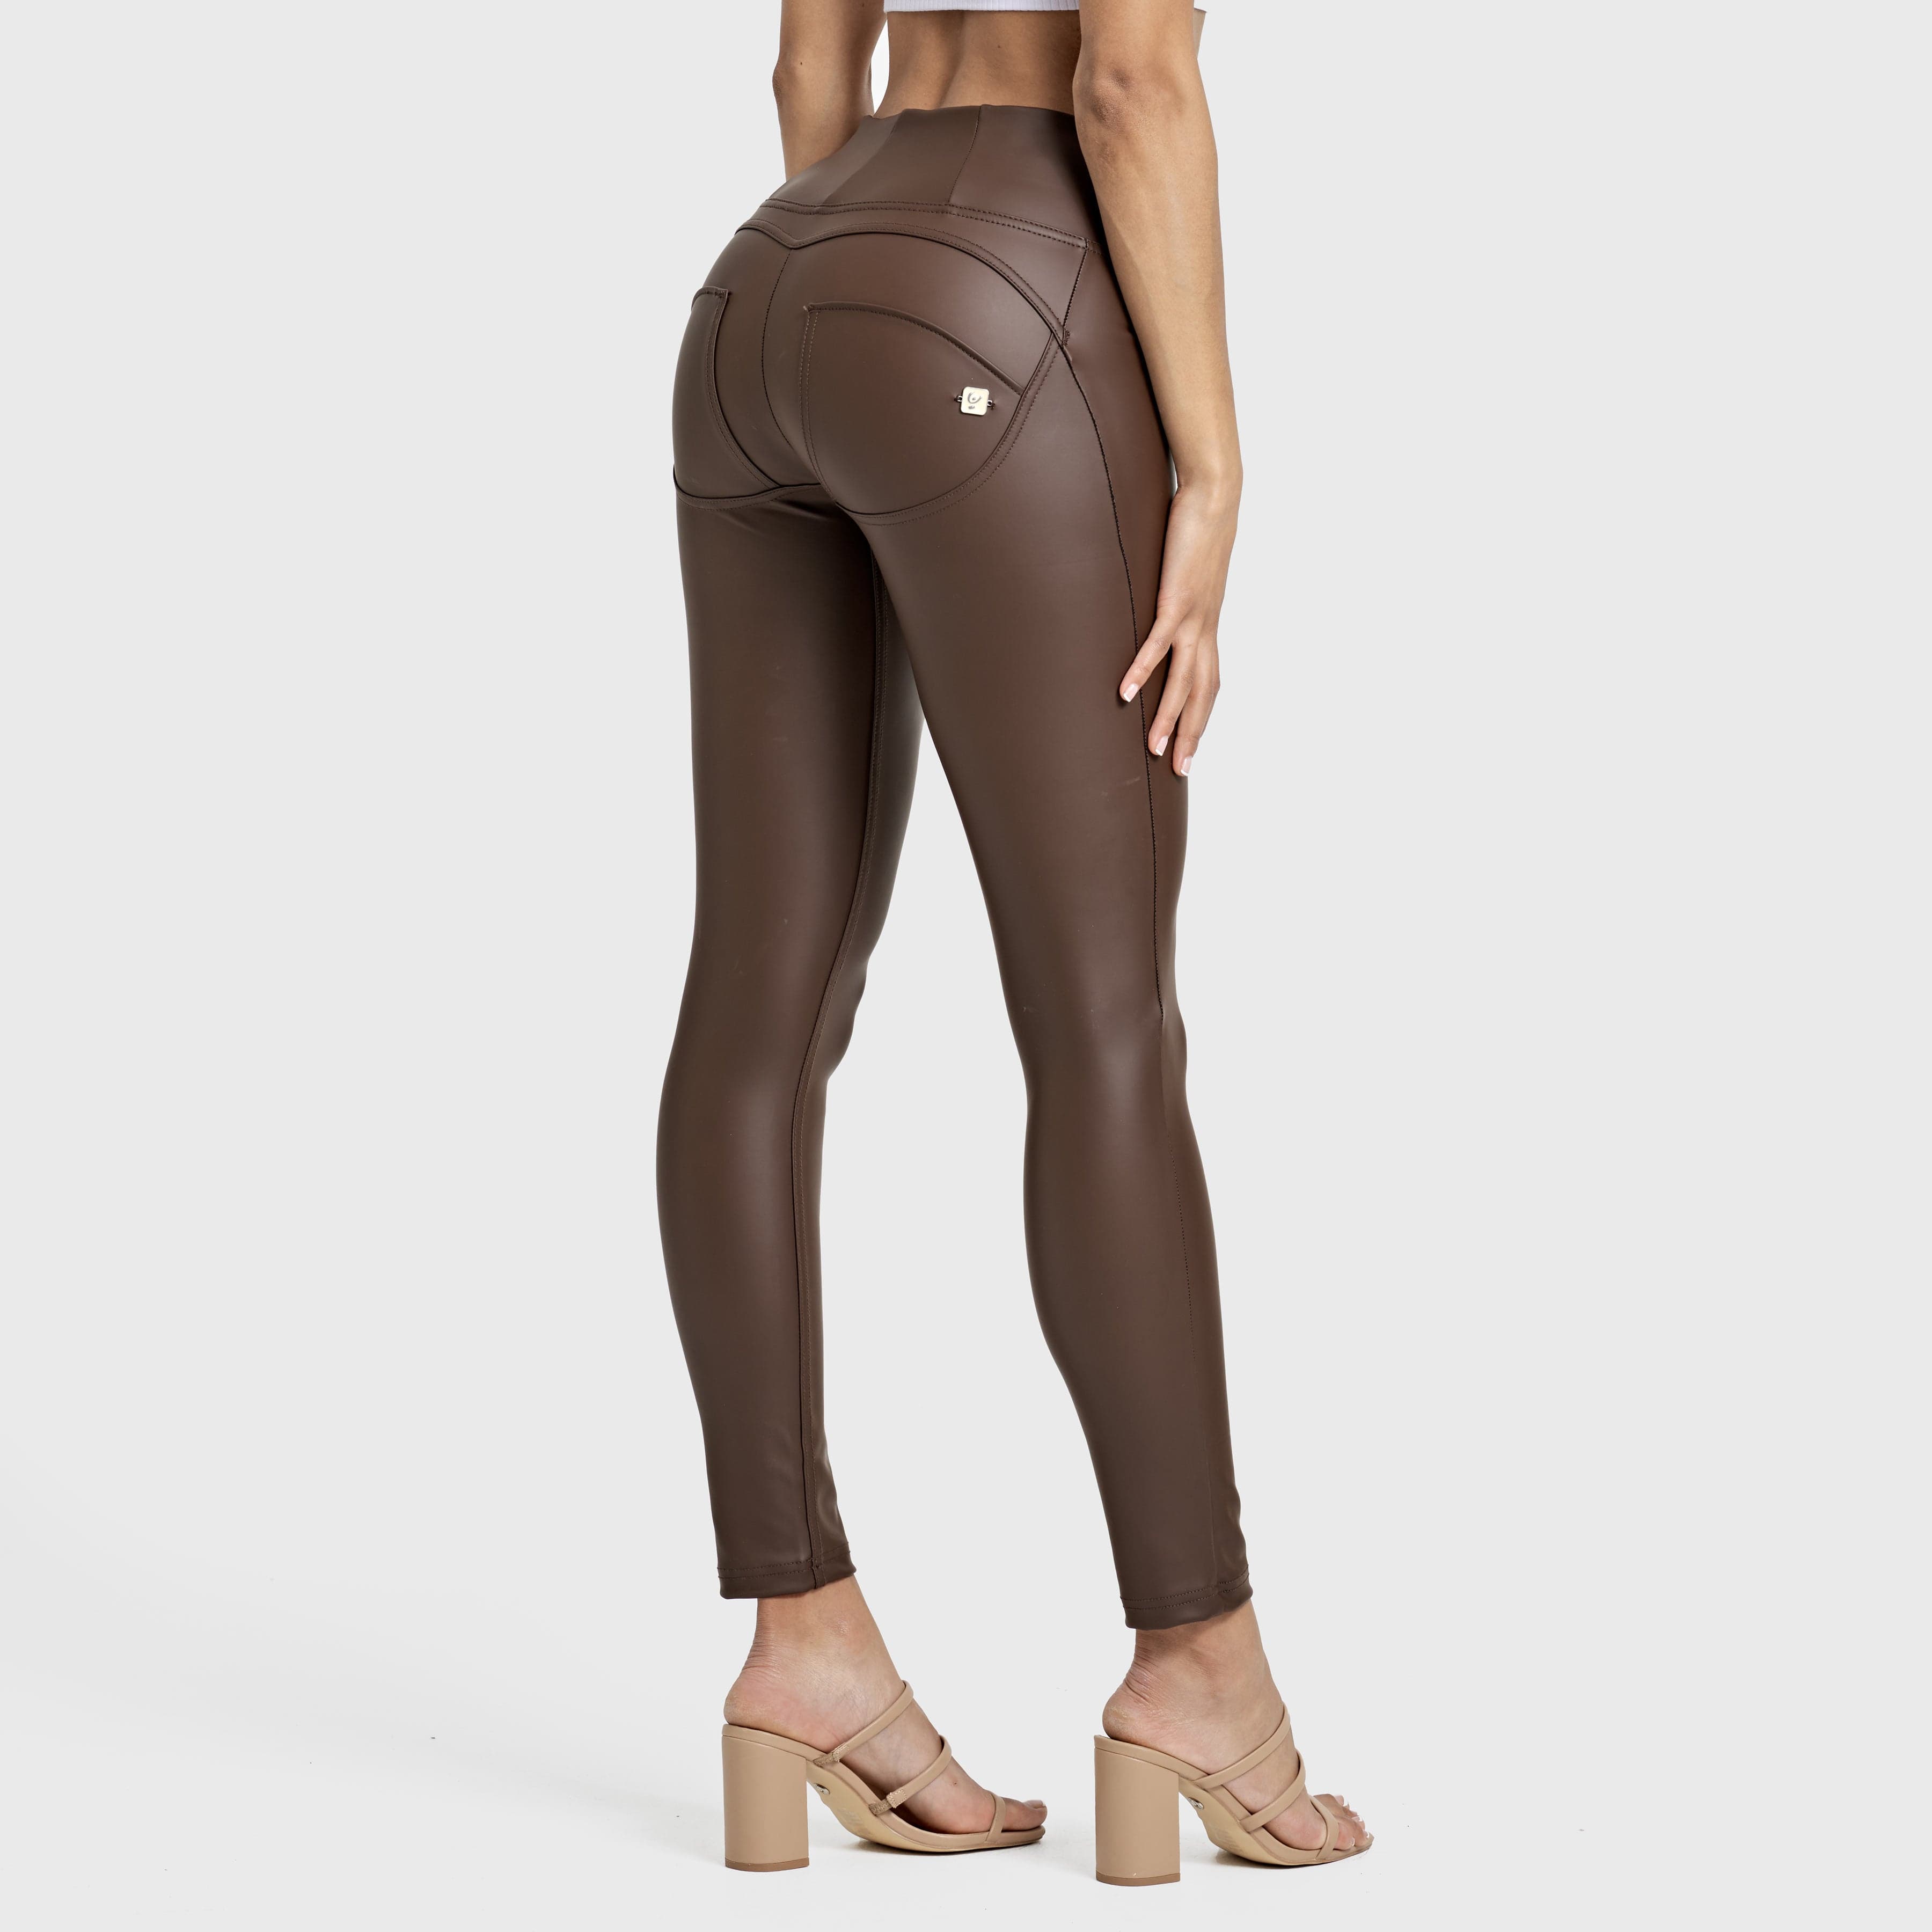 WR.UP® Faux Leather - High Waisted - 7/8 Length - Chocolate 2